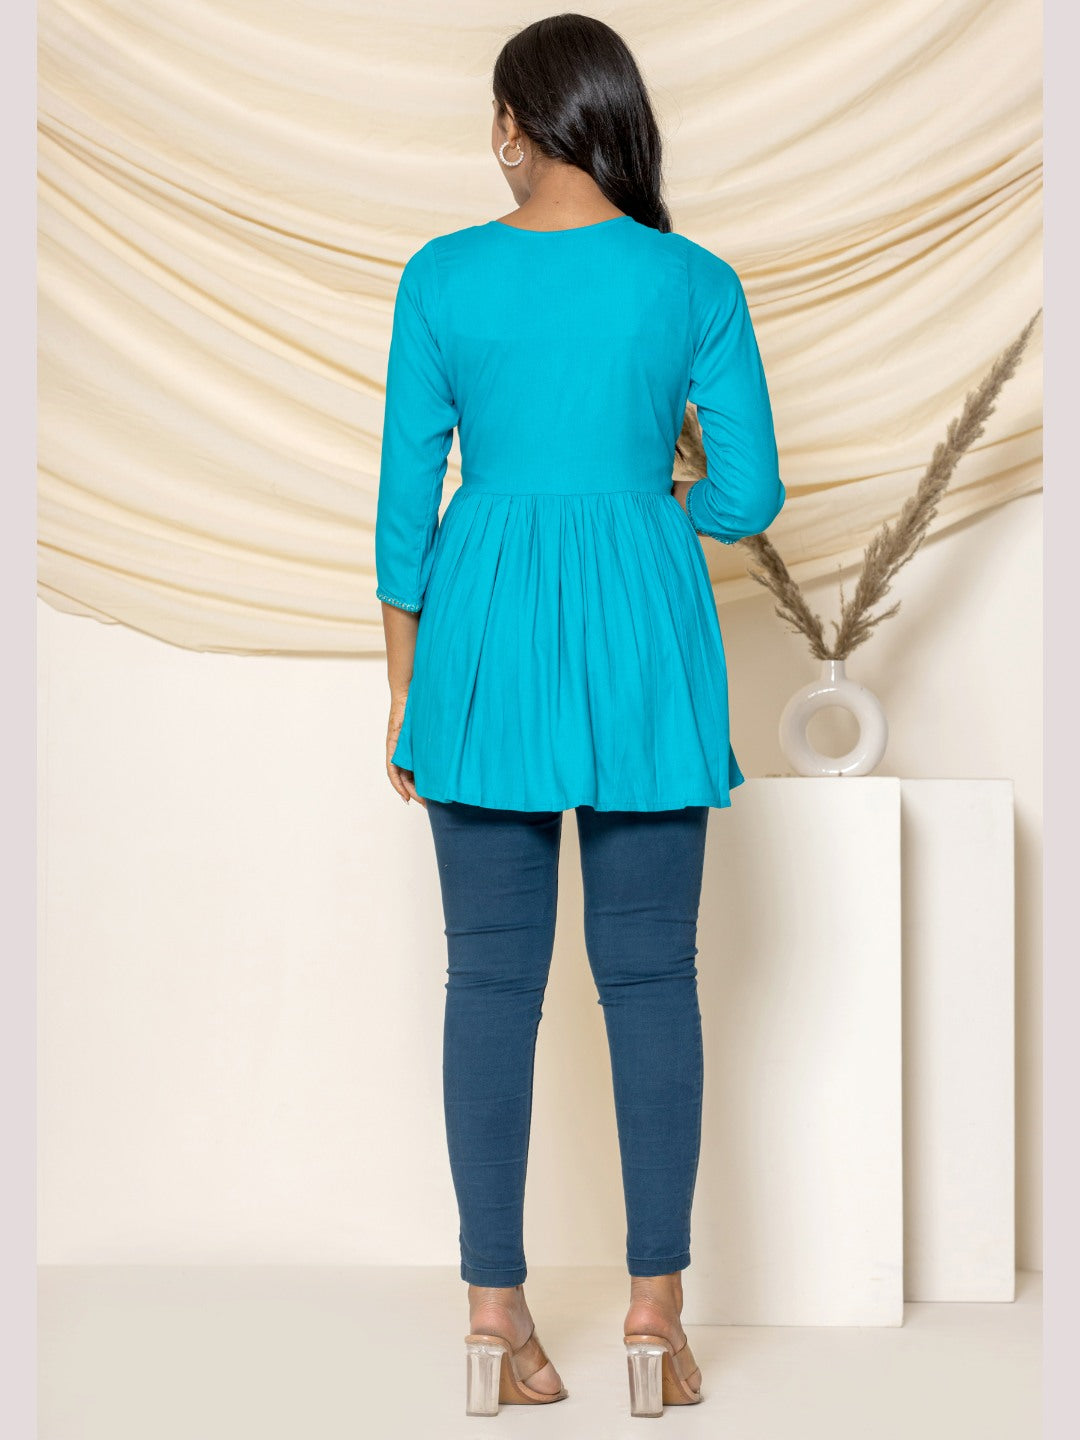 Solid Embroidered Peplum Top - Turquoise